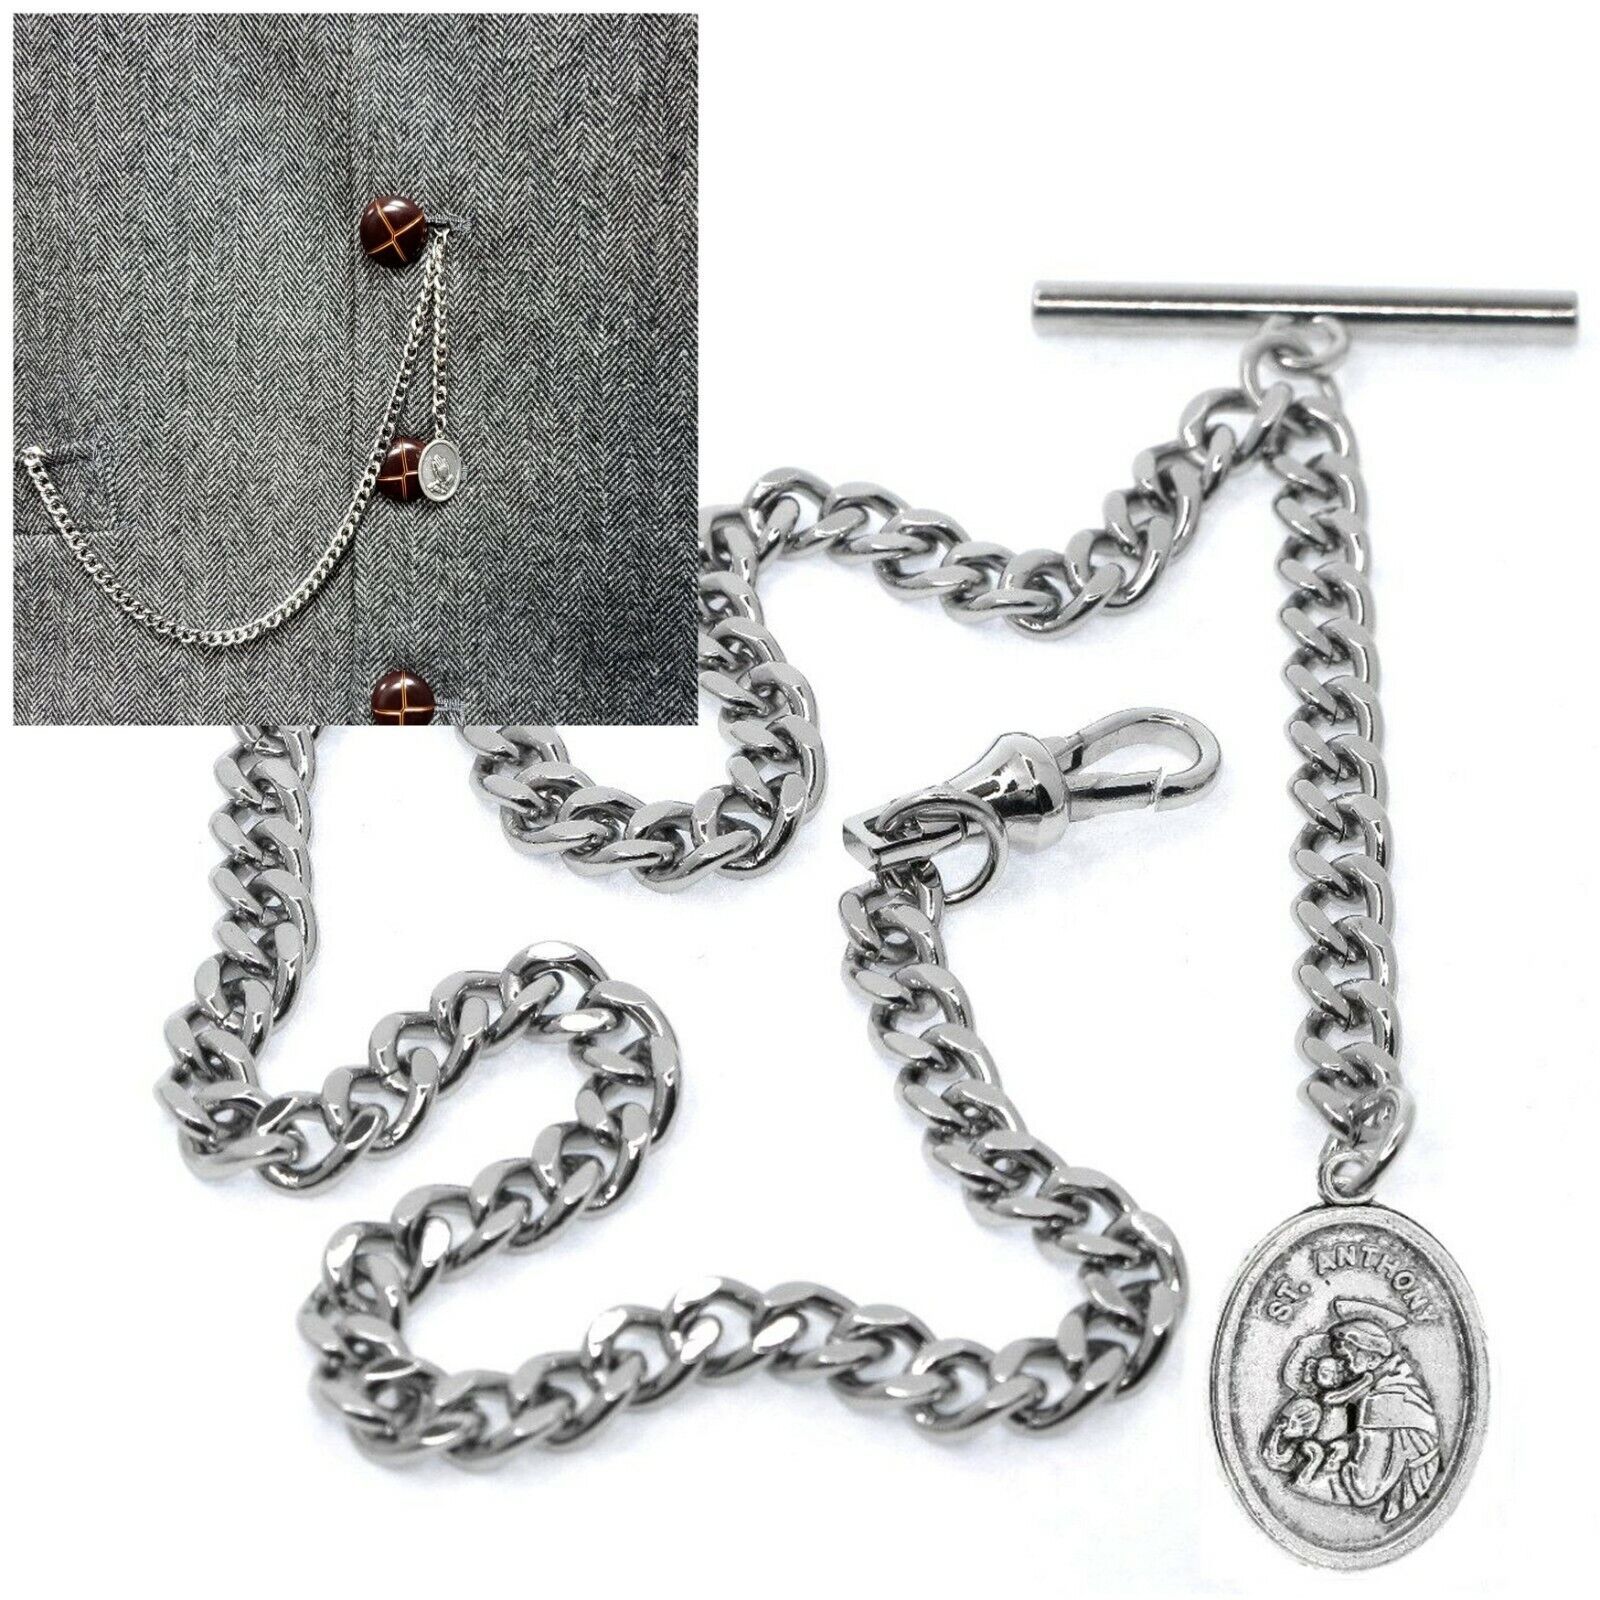 Primary image for Albert Chain Silver Pocket Watch Chain Saint Anthony Medal Fob Swivel Clasp 197